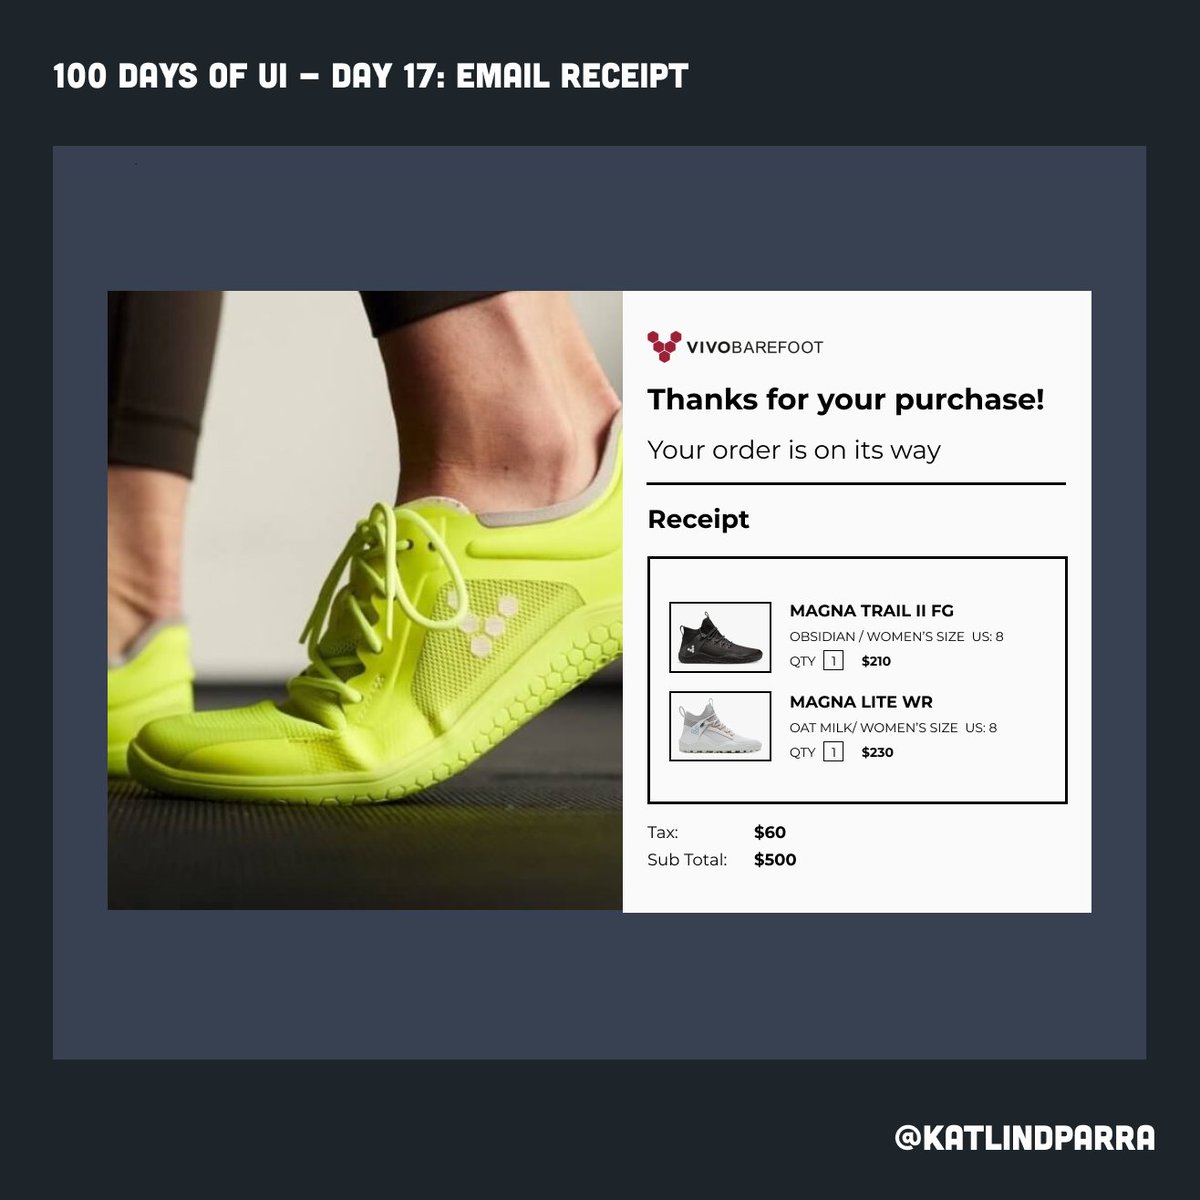 #day17 of #100daysofUI going strong with day 17! Made a quick email receipt for one of my all time favorite footwear brands, @VIVOBAREFOOT !